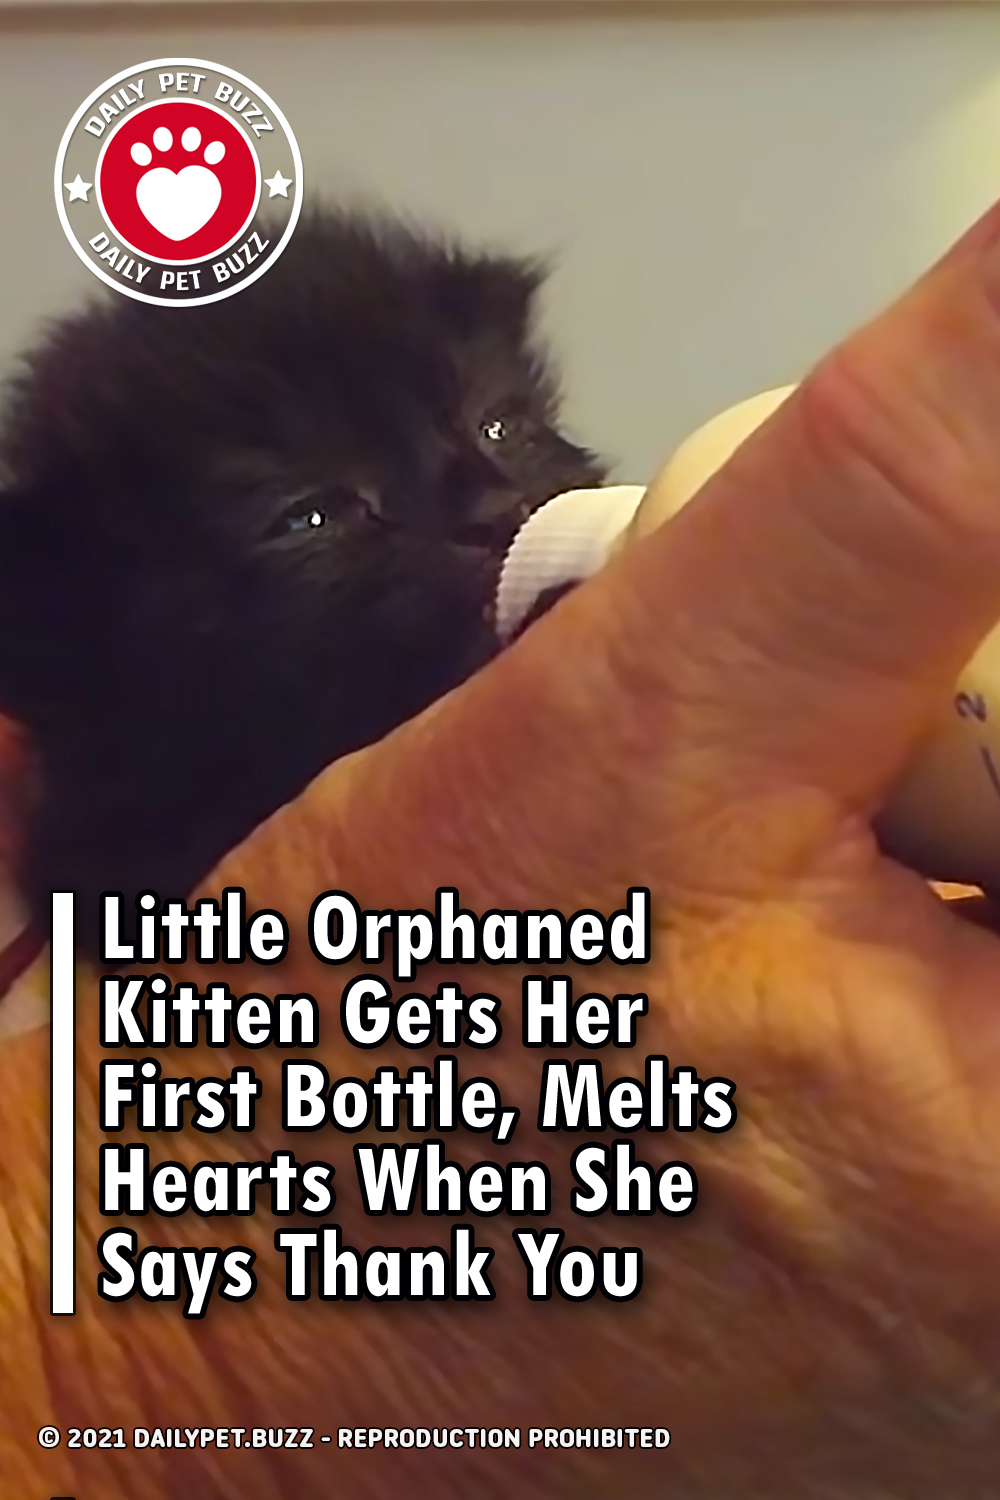 Little Orphaned Kitten Gets Her First Bottle, Melts Hearts When She Says Thank You